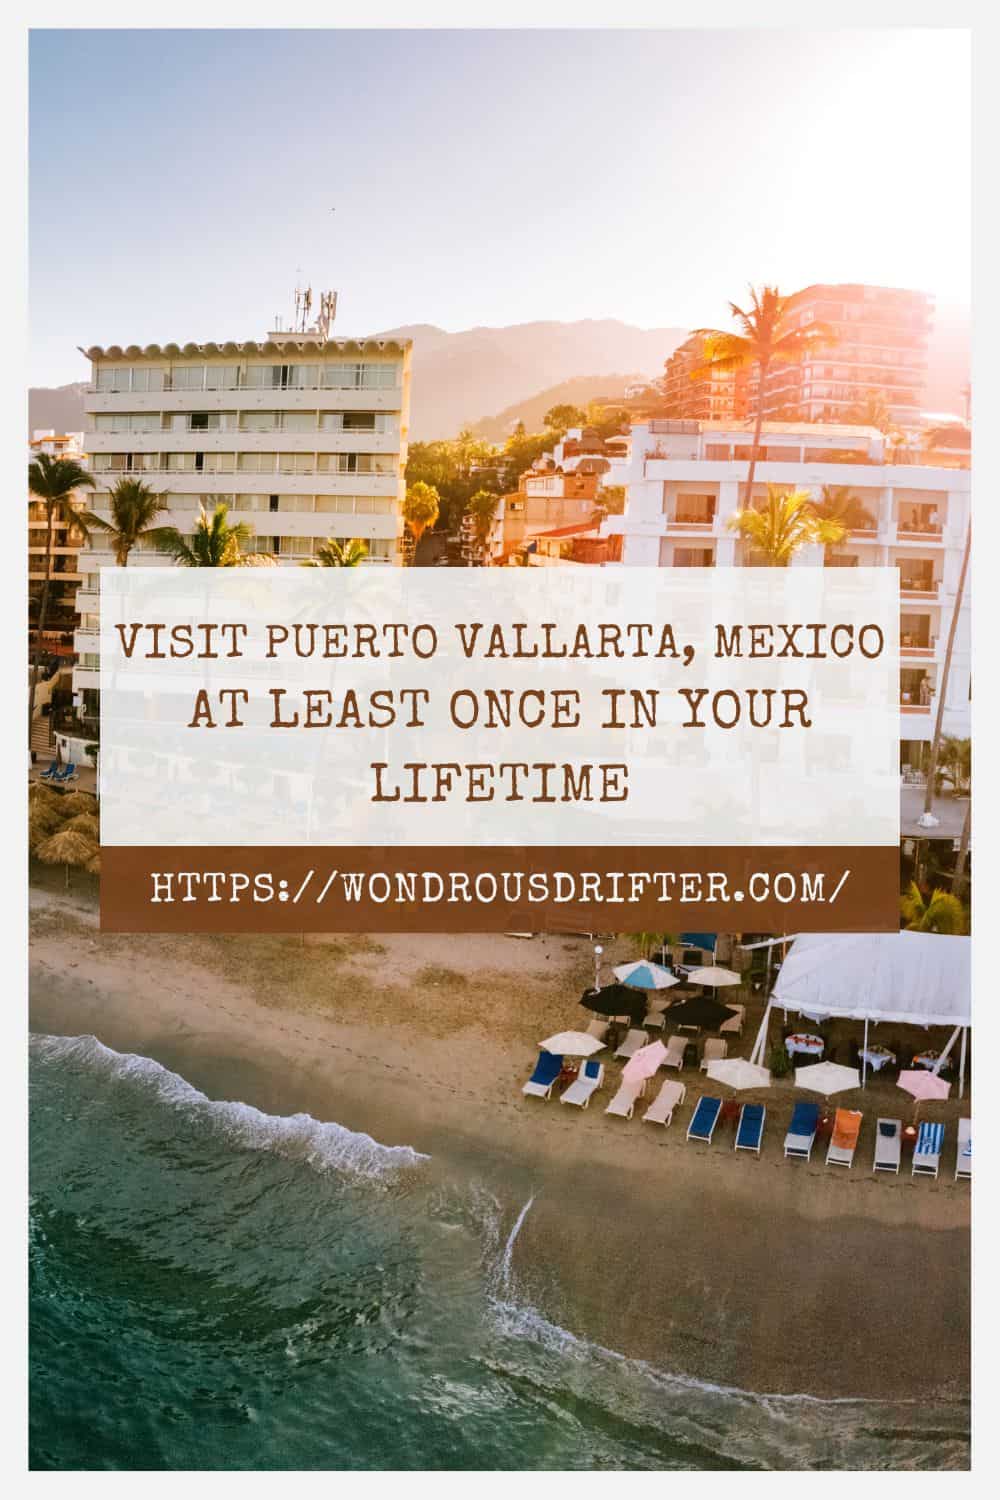 Visit Puerto Vallarta Mexico at least once in your lifetime